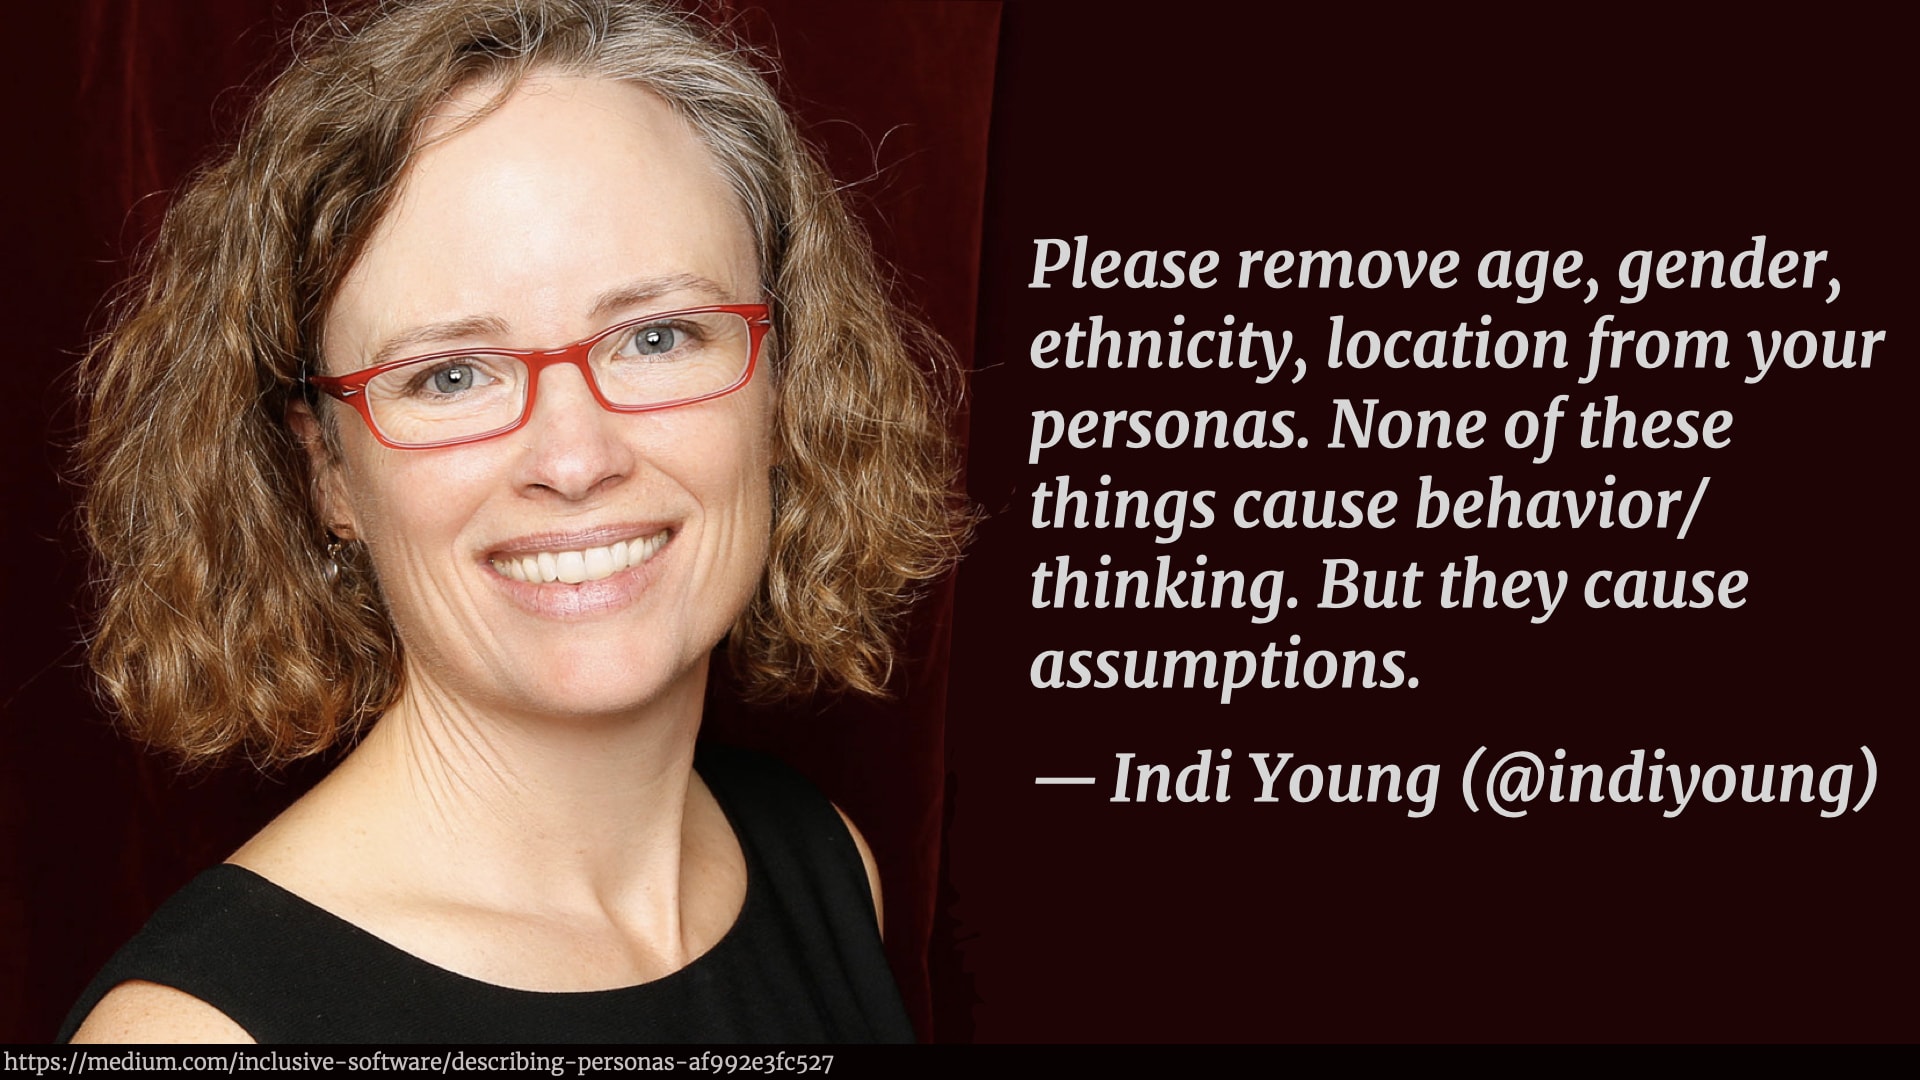 A photo of Indi Young alongside a quotation from her article on persona: 'Please remove age, gender, ethnicity, location from your personas. None of these things cause behavior/thinking. But they cause assumptions.'